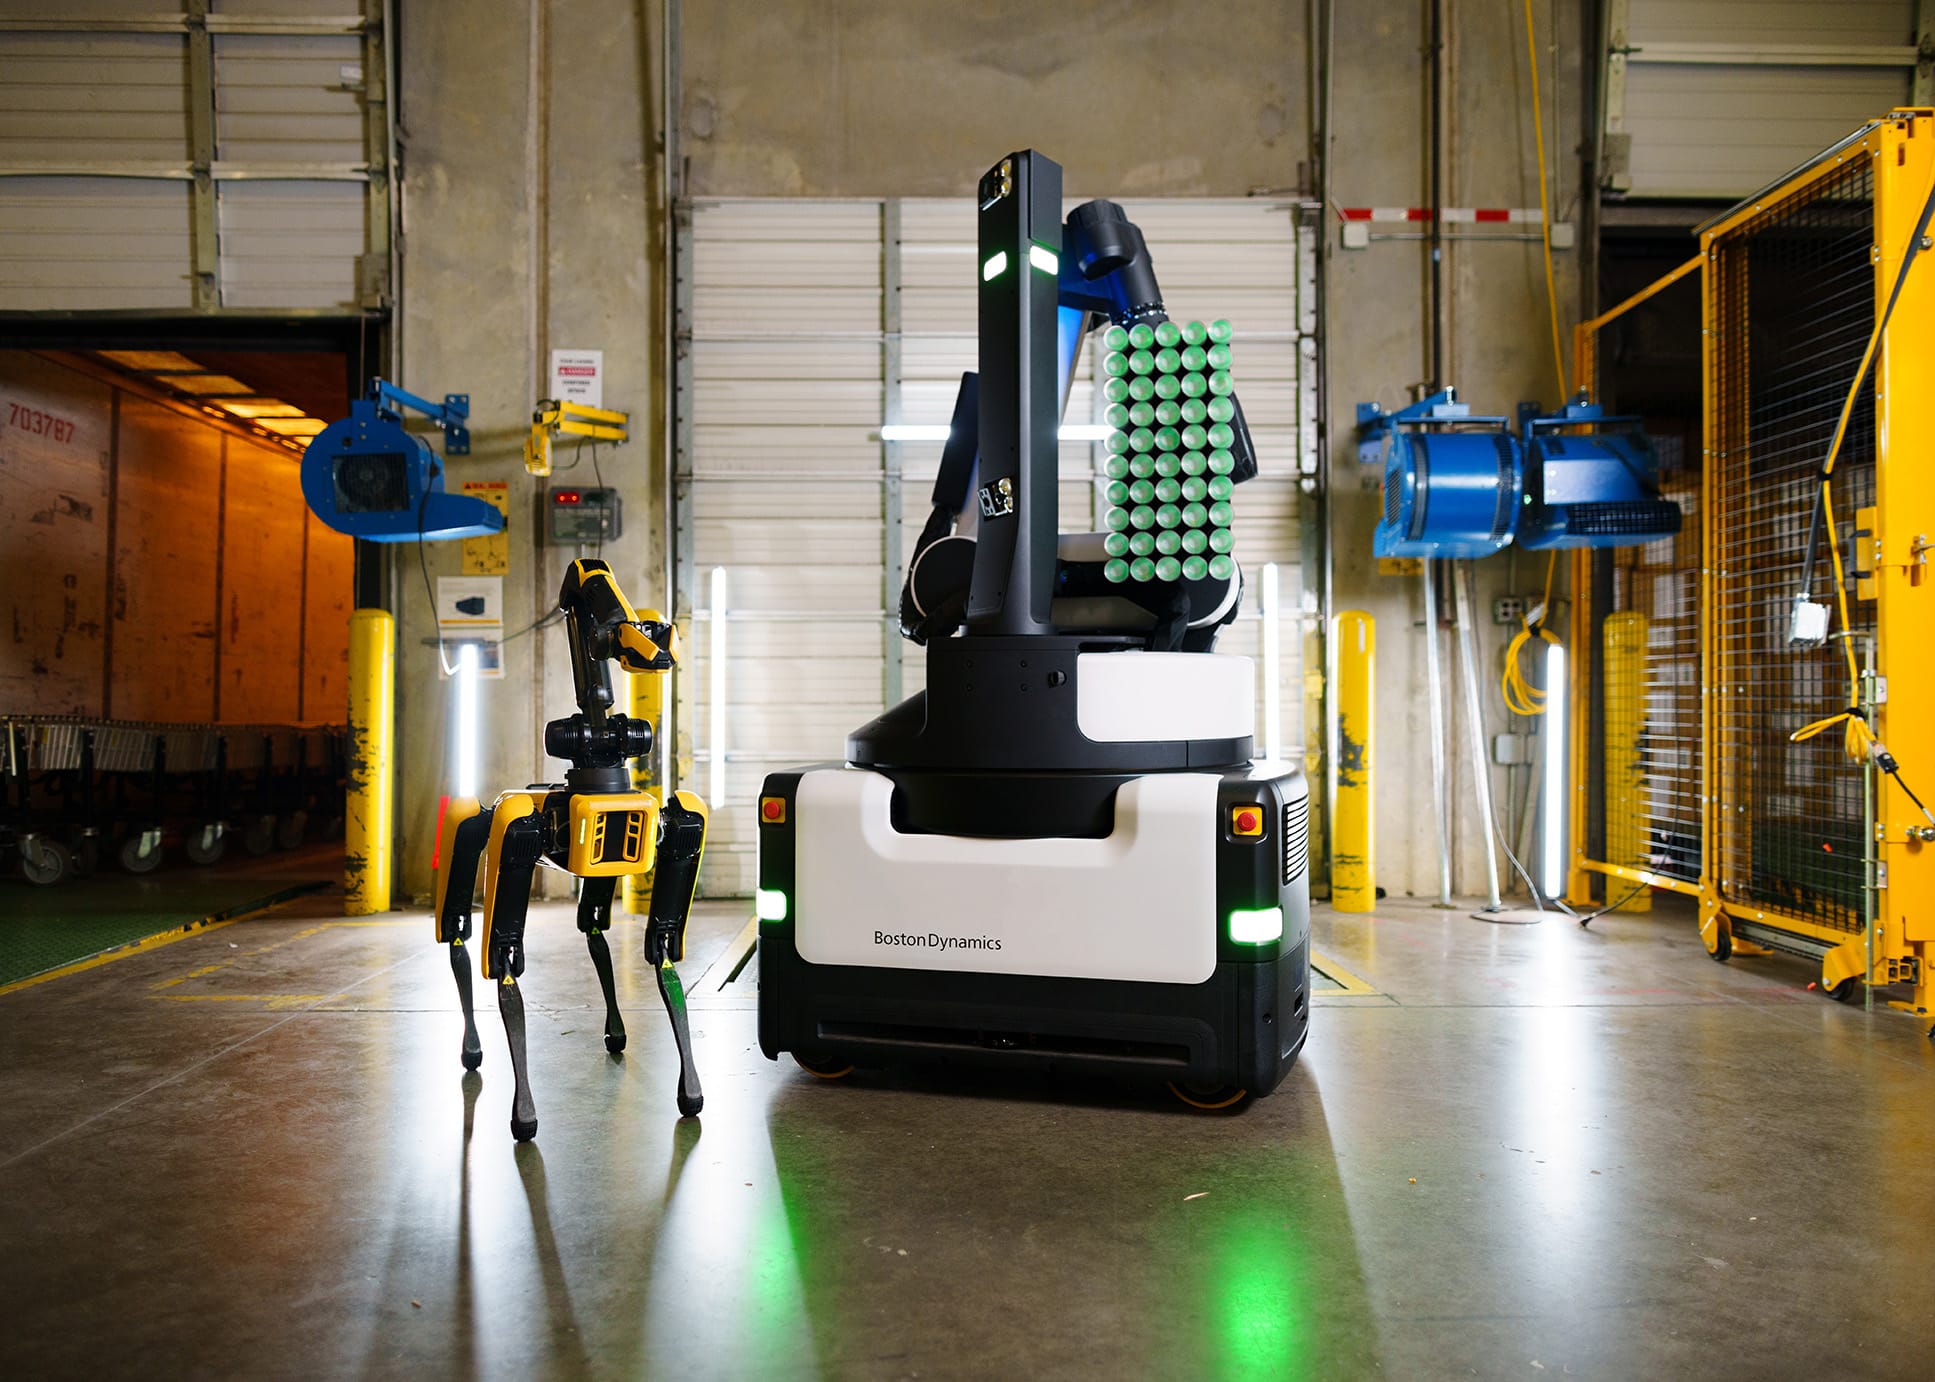 Commercial robots, Spot and Stretch, side by side in a warehouse